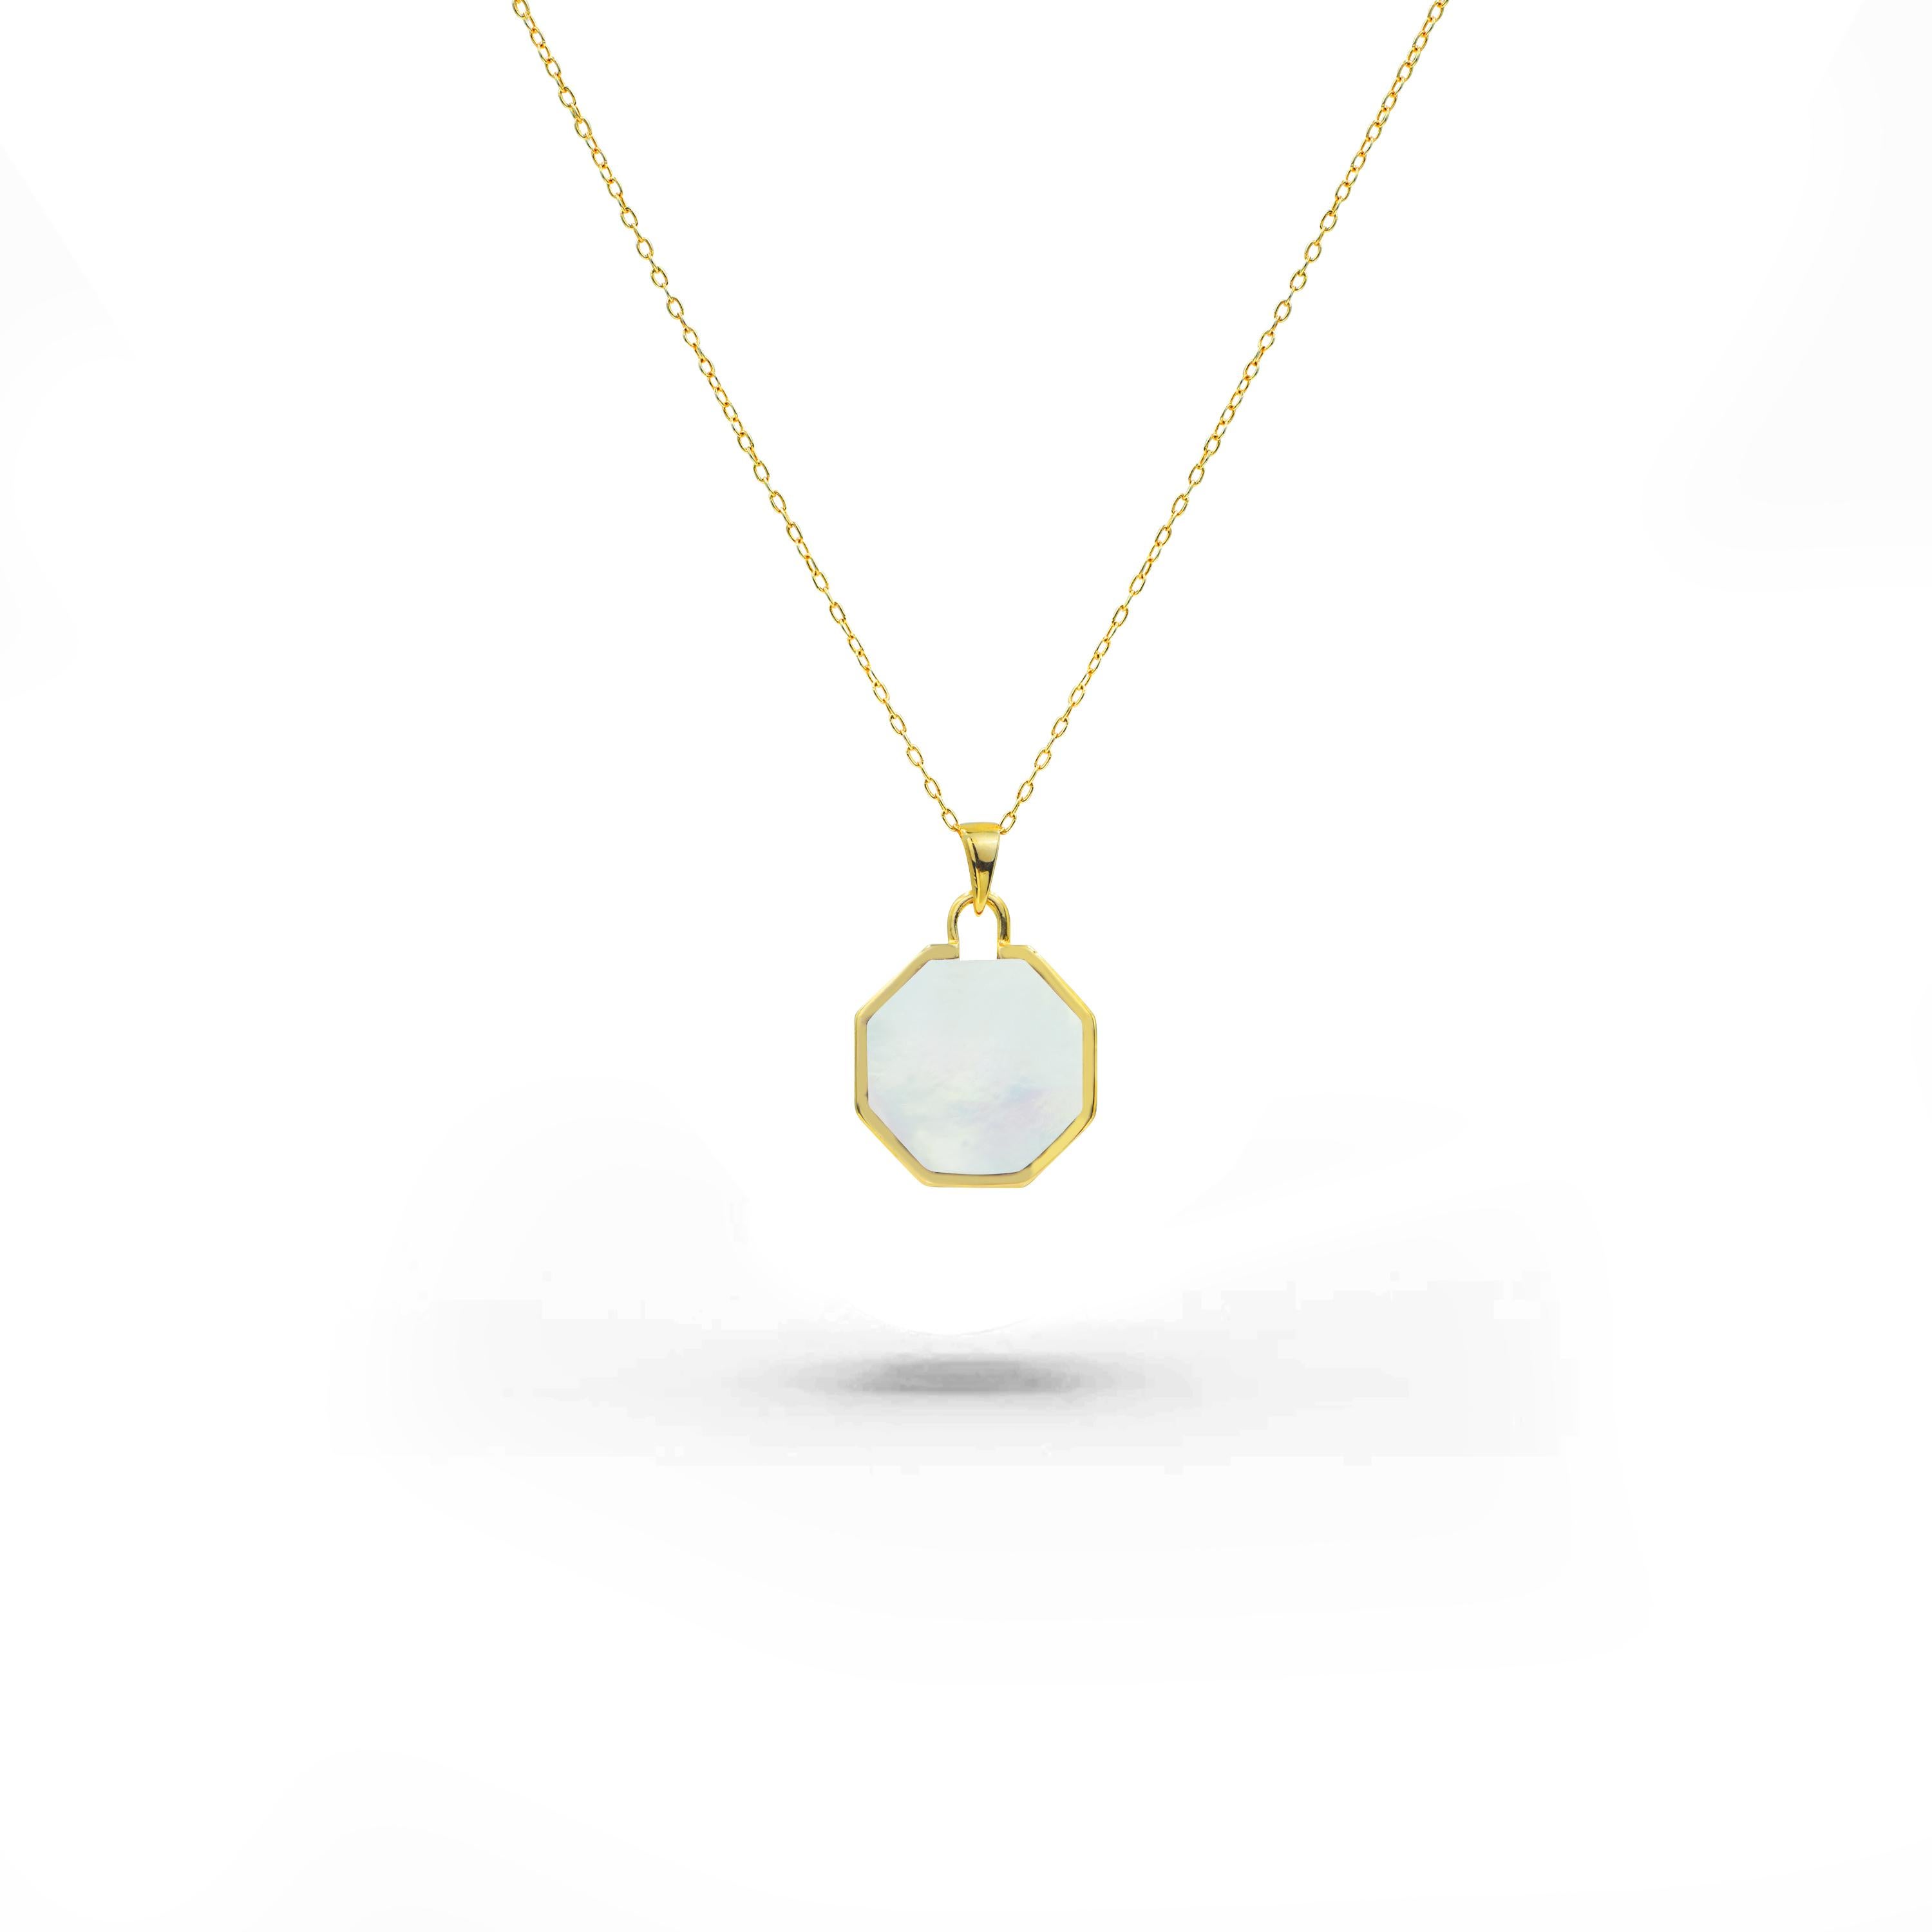 Introducing our exquisite 18K Gold Filled Necklace, a stunning fusion of natural beauty and refined craftsmanship. This captivating piece showcases the iridescent allure of Abalone, the delicate elegance of Mother of Pearl, and the sophisticated